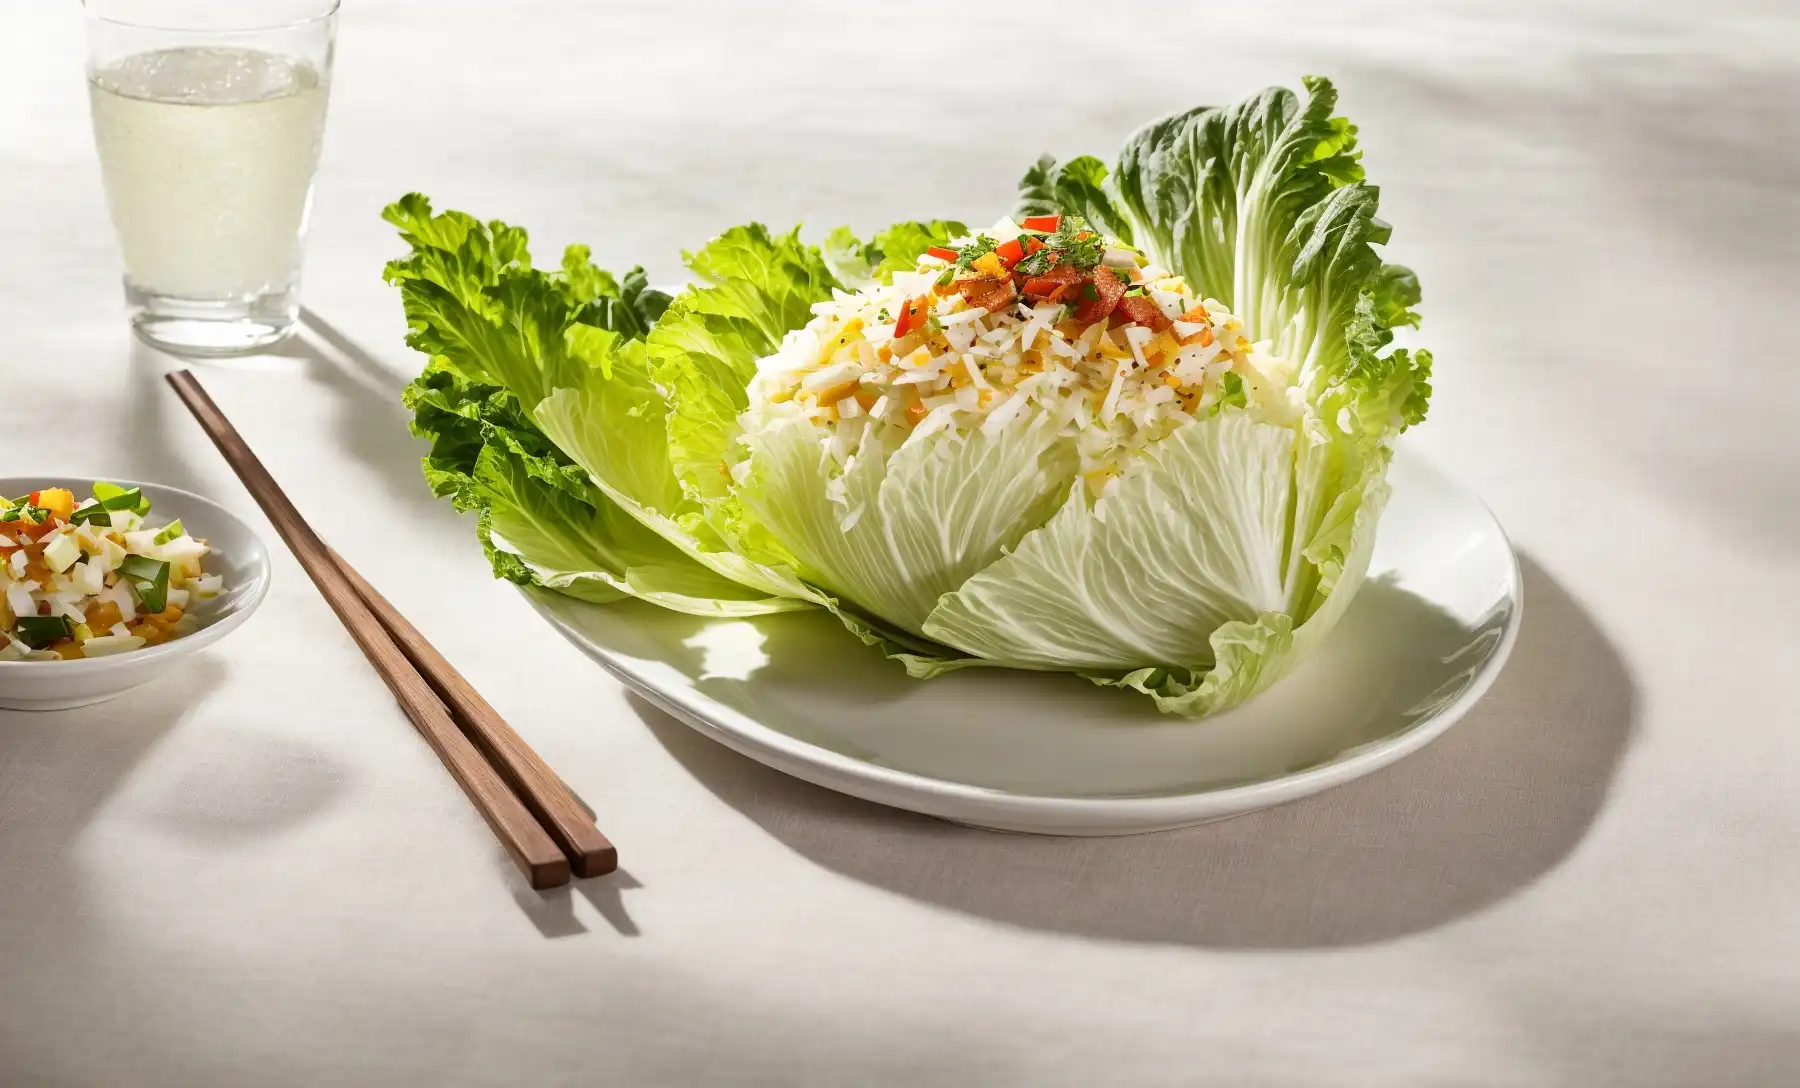 How to Eat Napa Cabbage